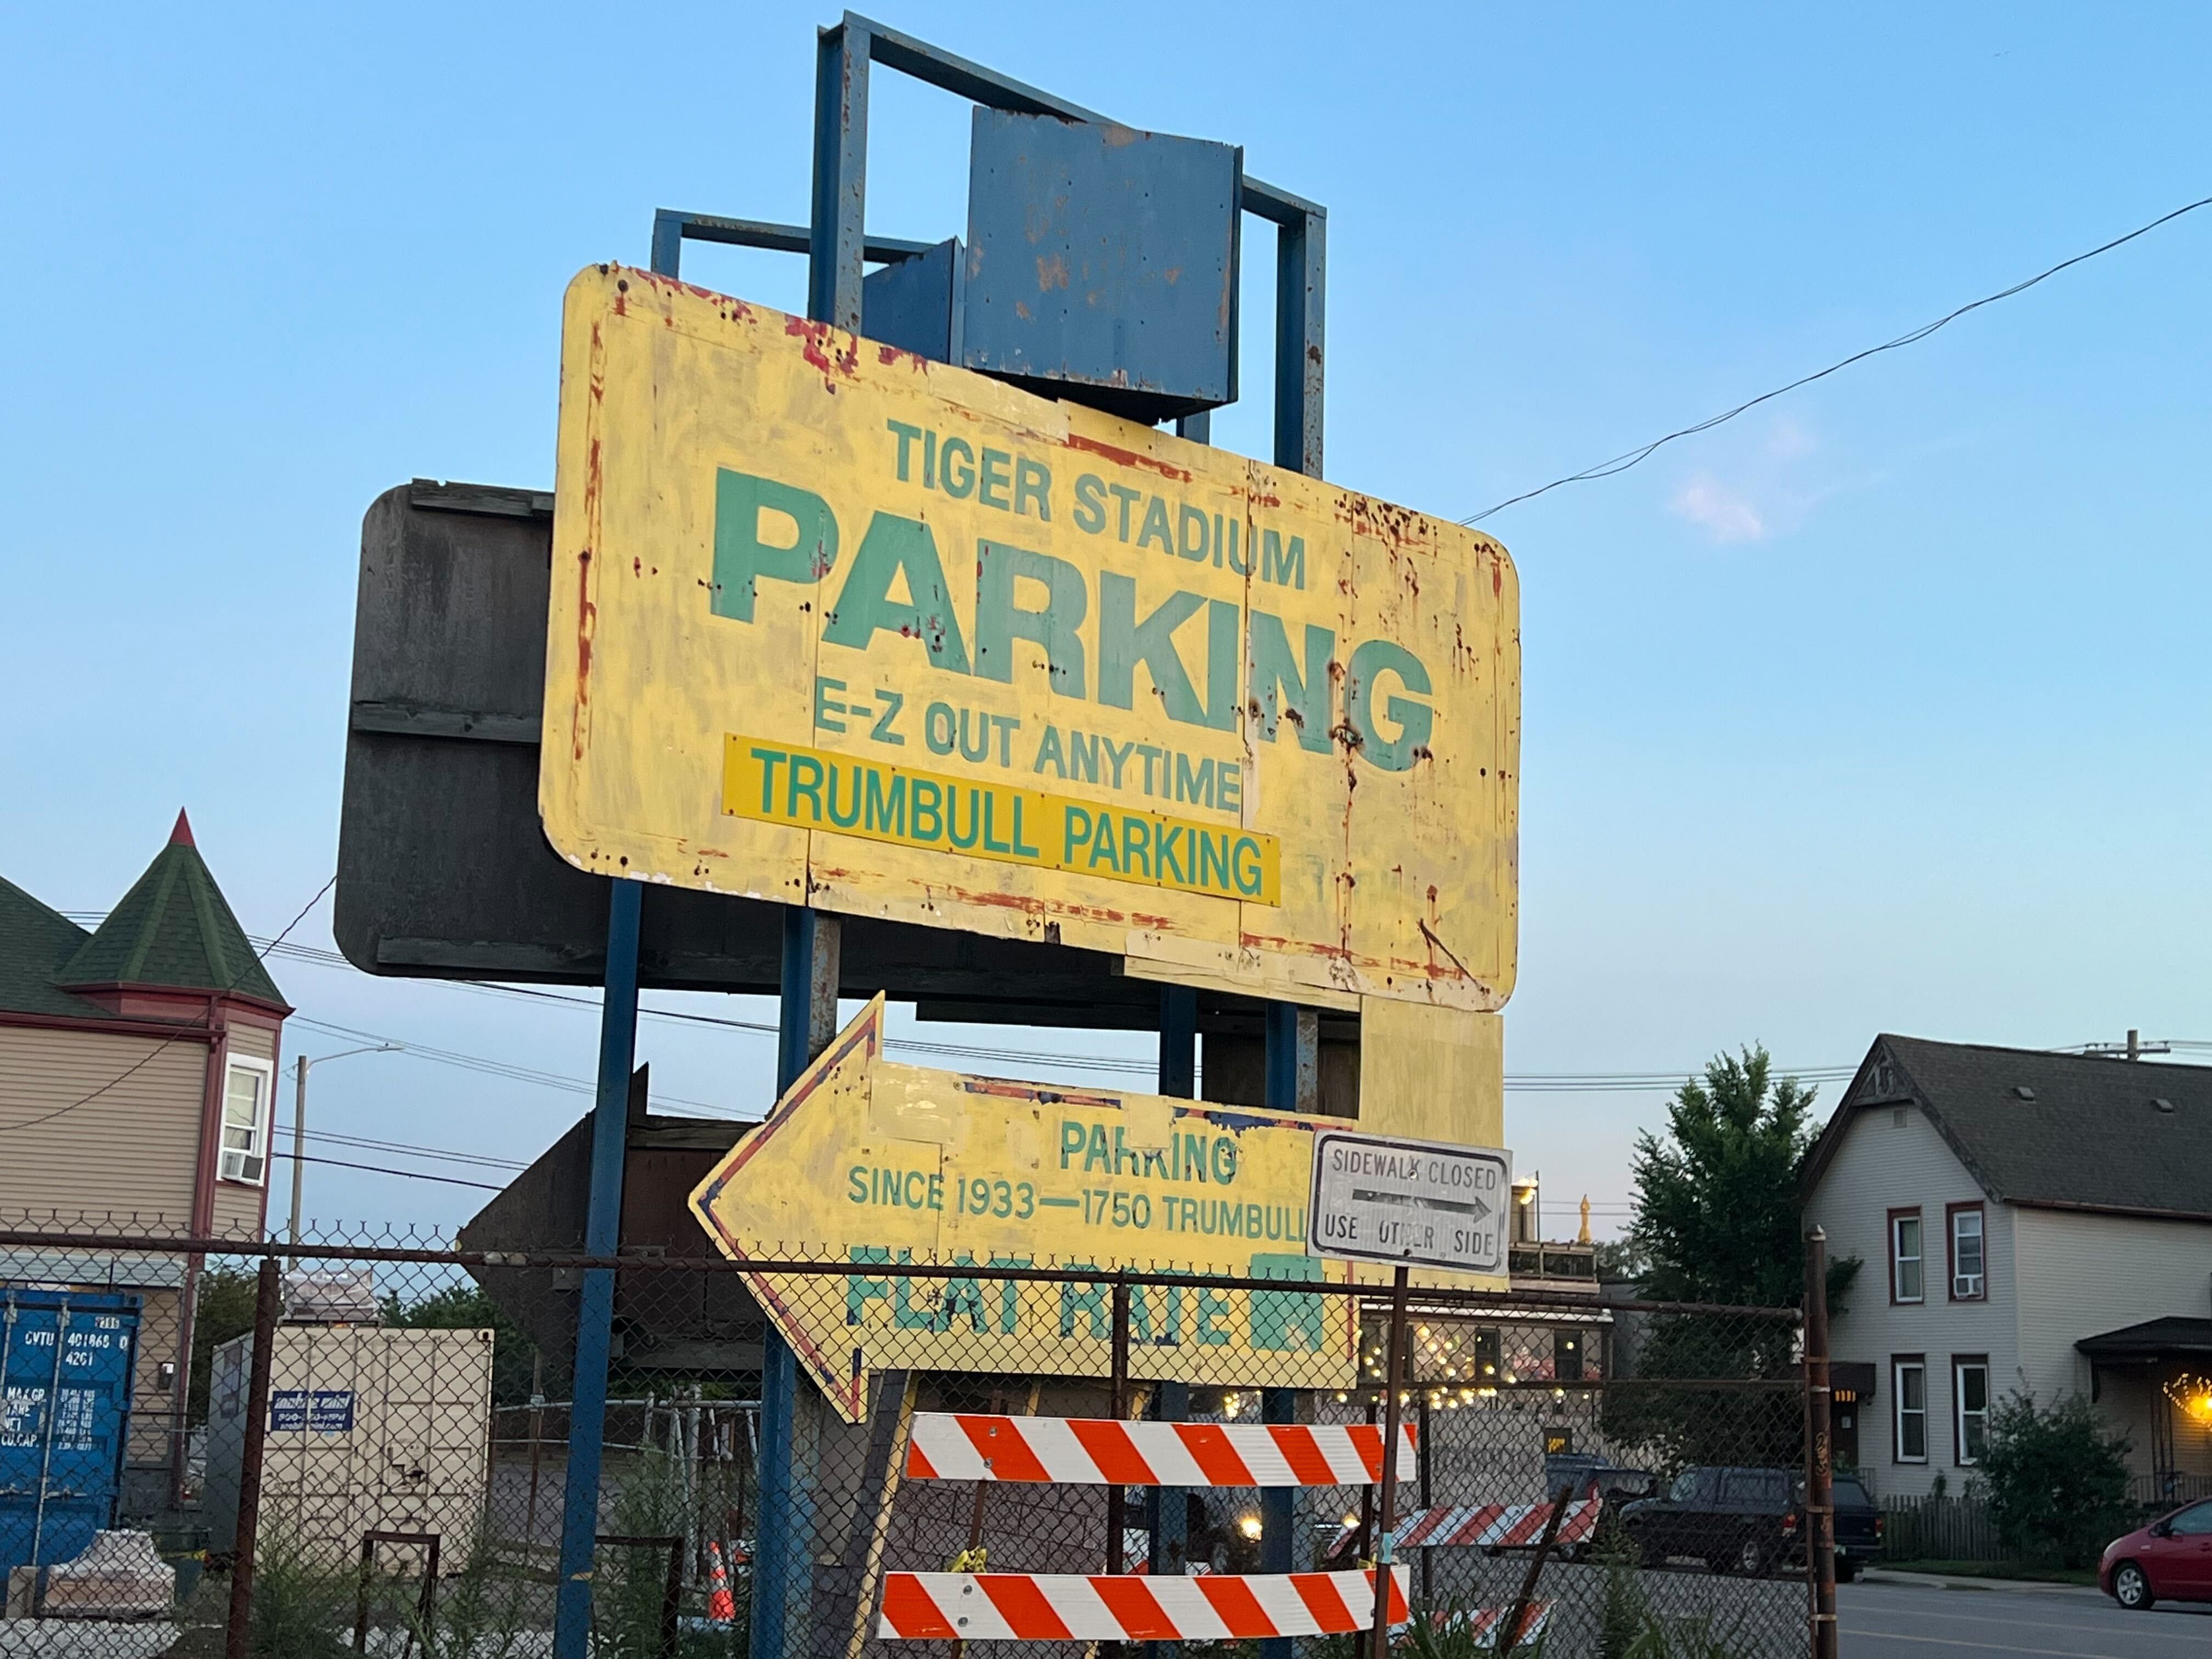 The old Tiger Stadium sign, rusted, yellow and green.